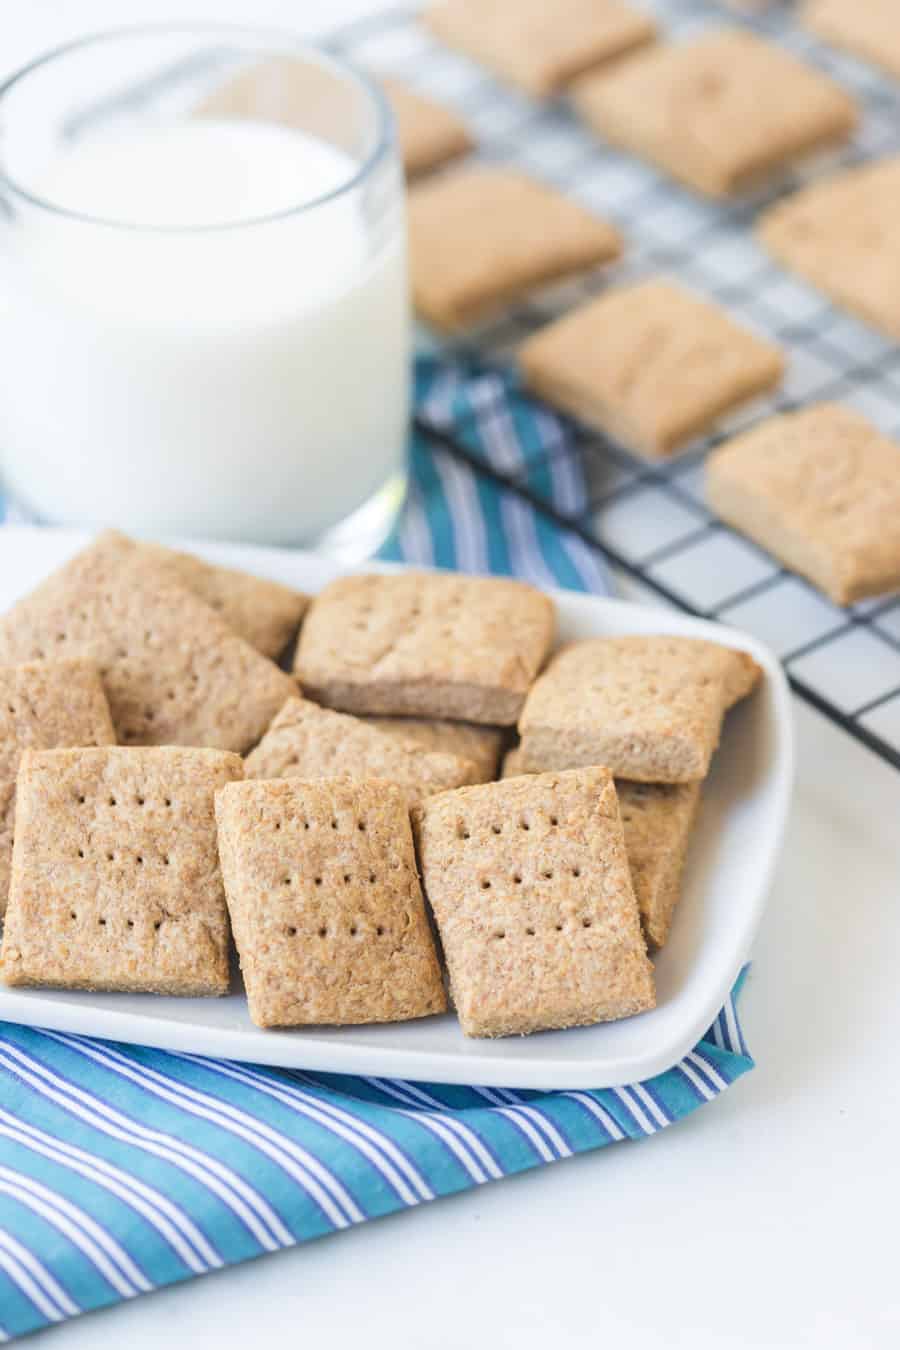 simple homemade graham crackers on white dish with a blue towel and cooling rack with a glass of milk